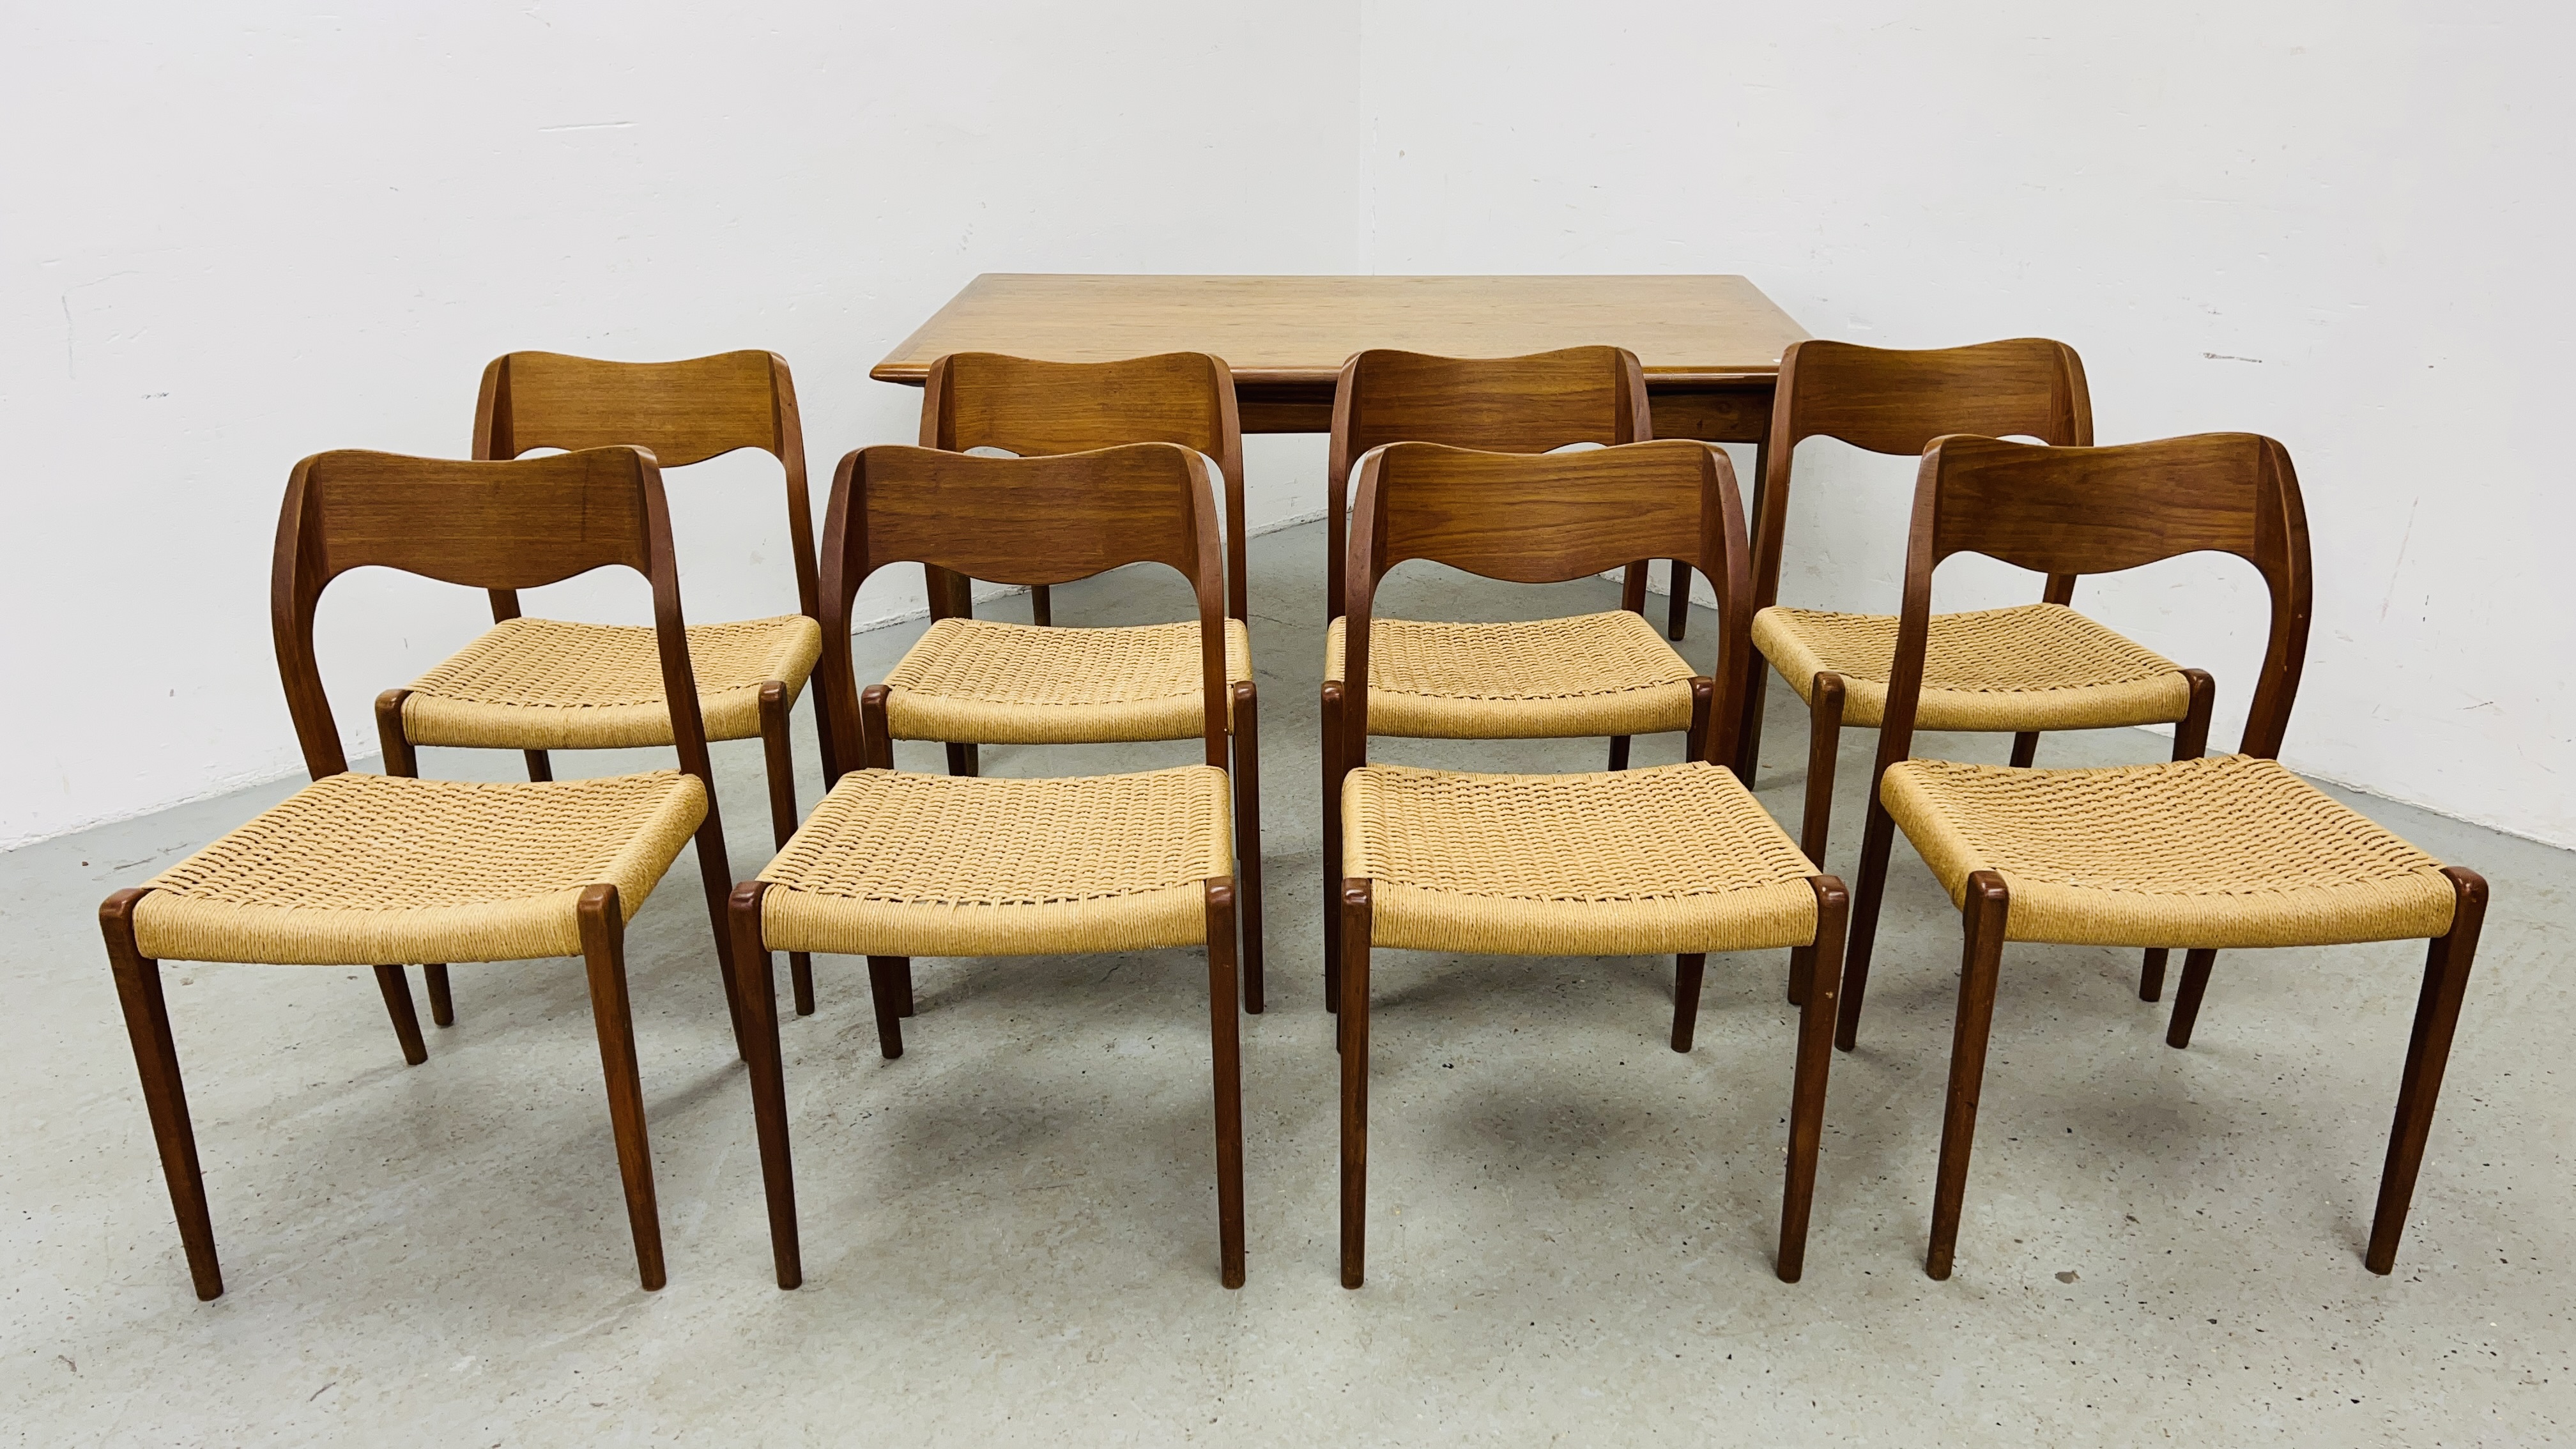 SET OF EIGHT J MOLLER DANISH TEAK DINING CHAIRS WITH WOVEN SISAL SEATS ALONG WITH A DRAWER LEAF - Image 2 of 48